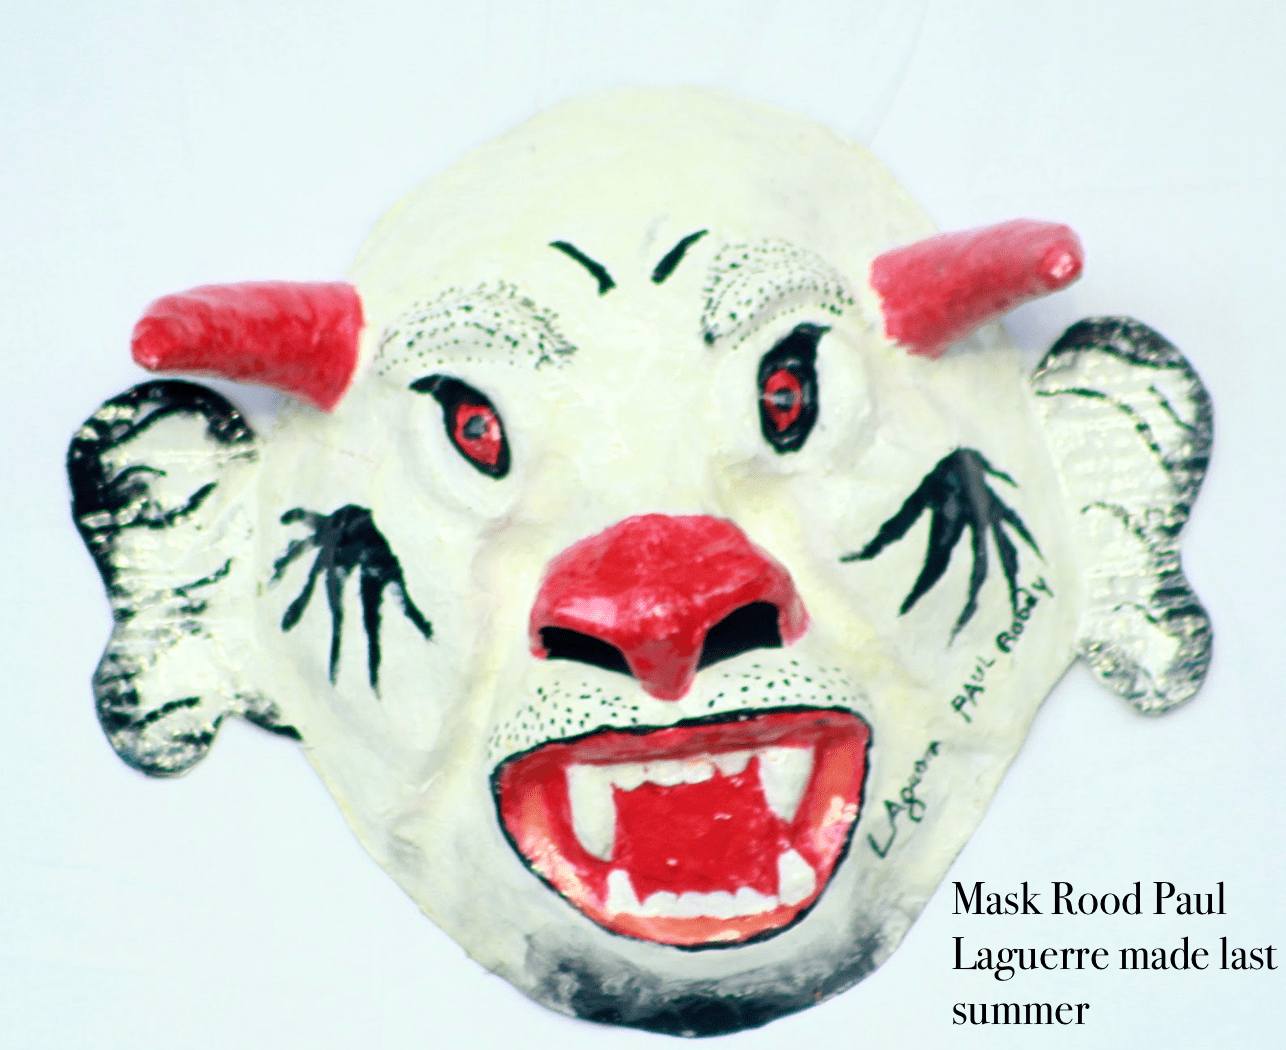 Mask by Rood Paul Laguerre